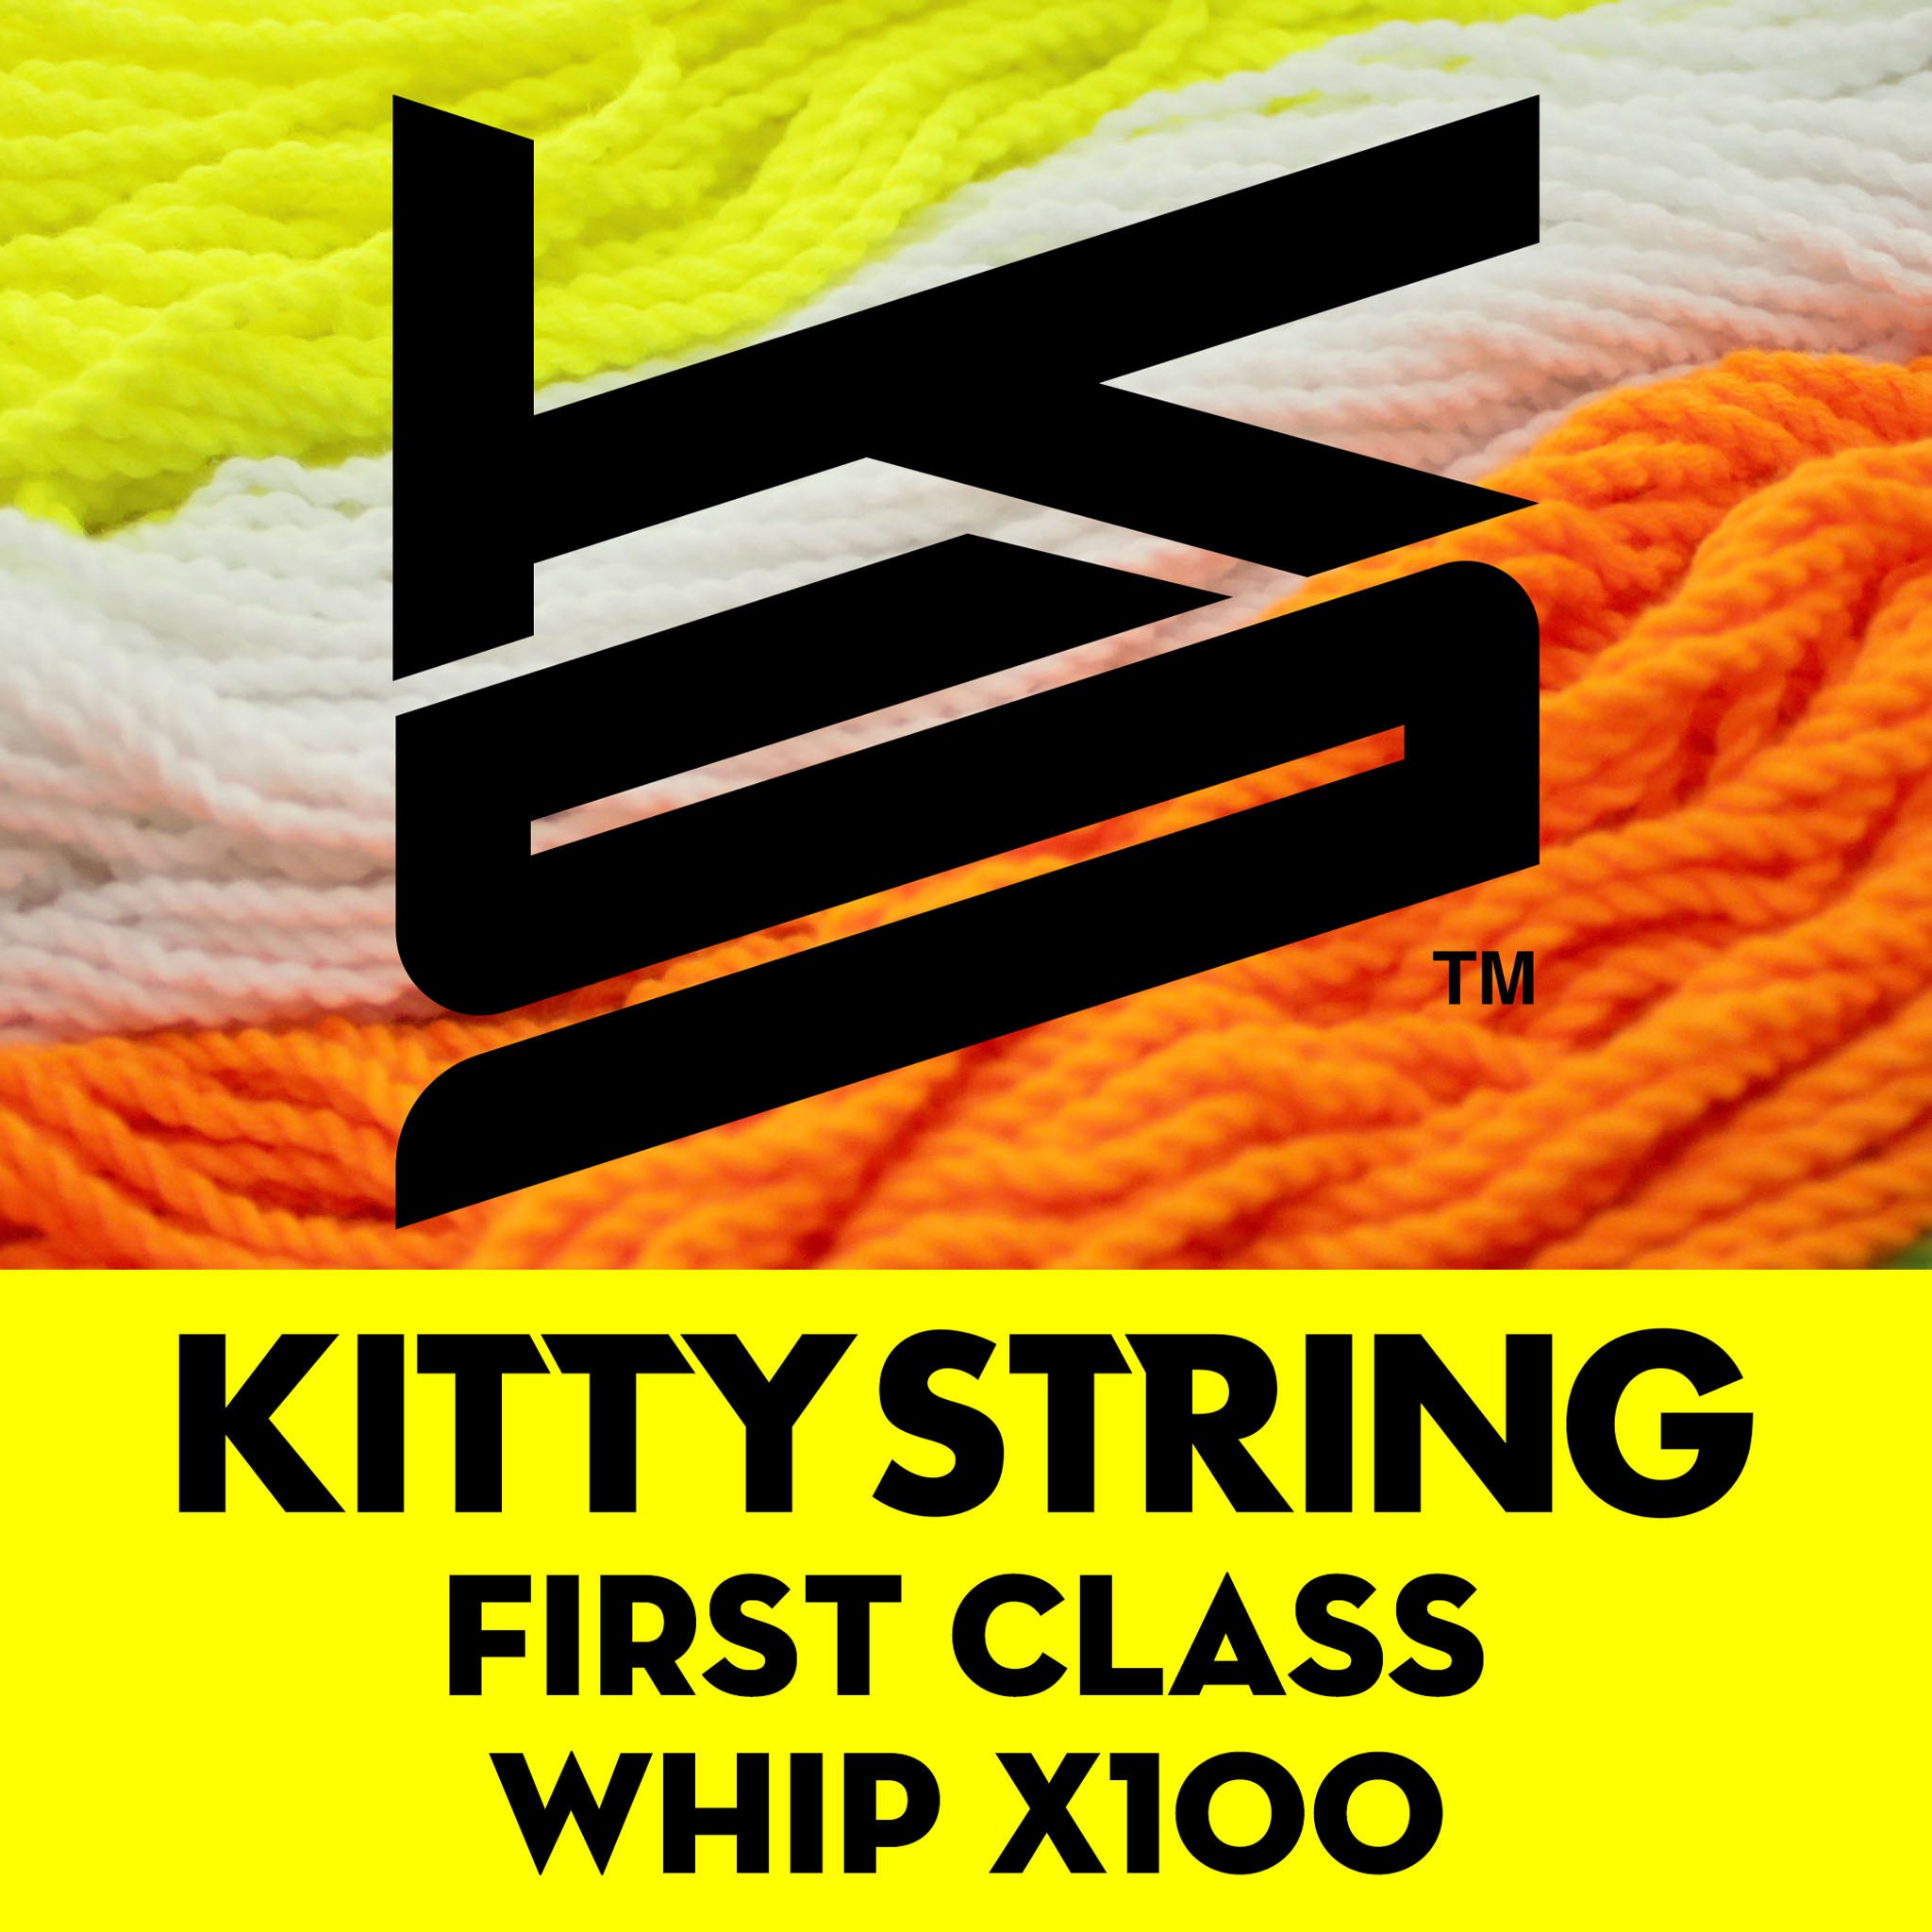 Kitty String (Poly100%) "First-Class" Whip x100